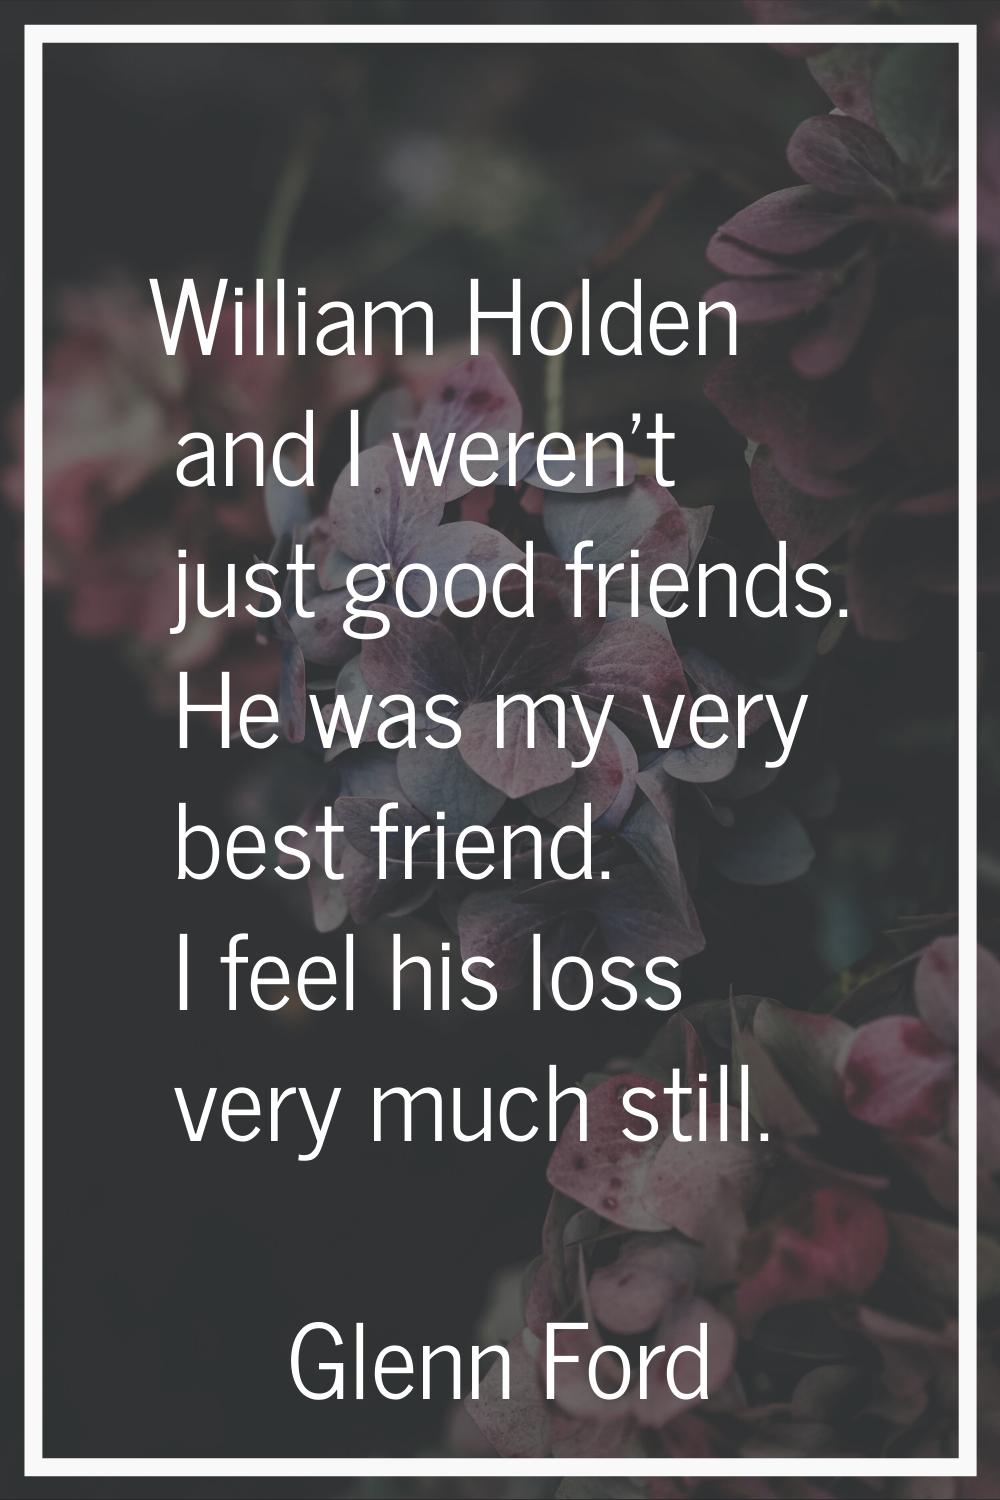 William Holden and I weren't just good friends. He was my very best friend. I feel his loss very mu